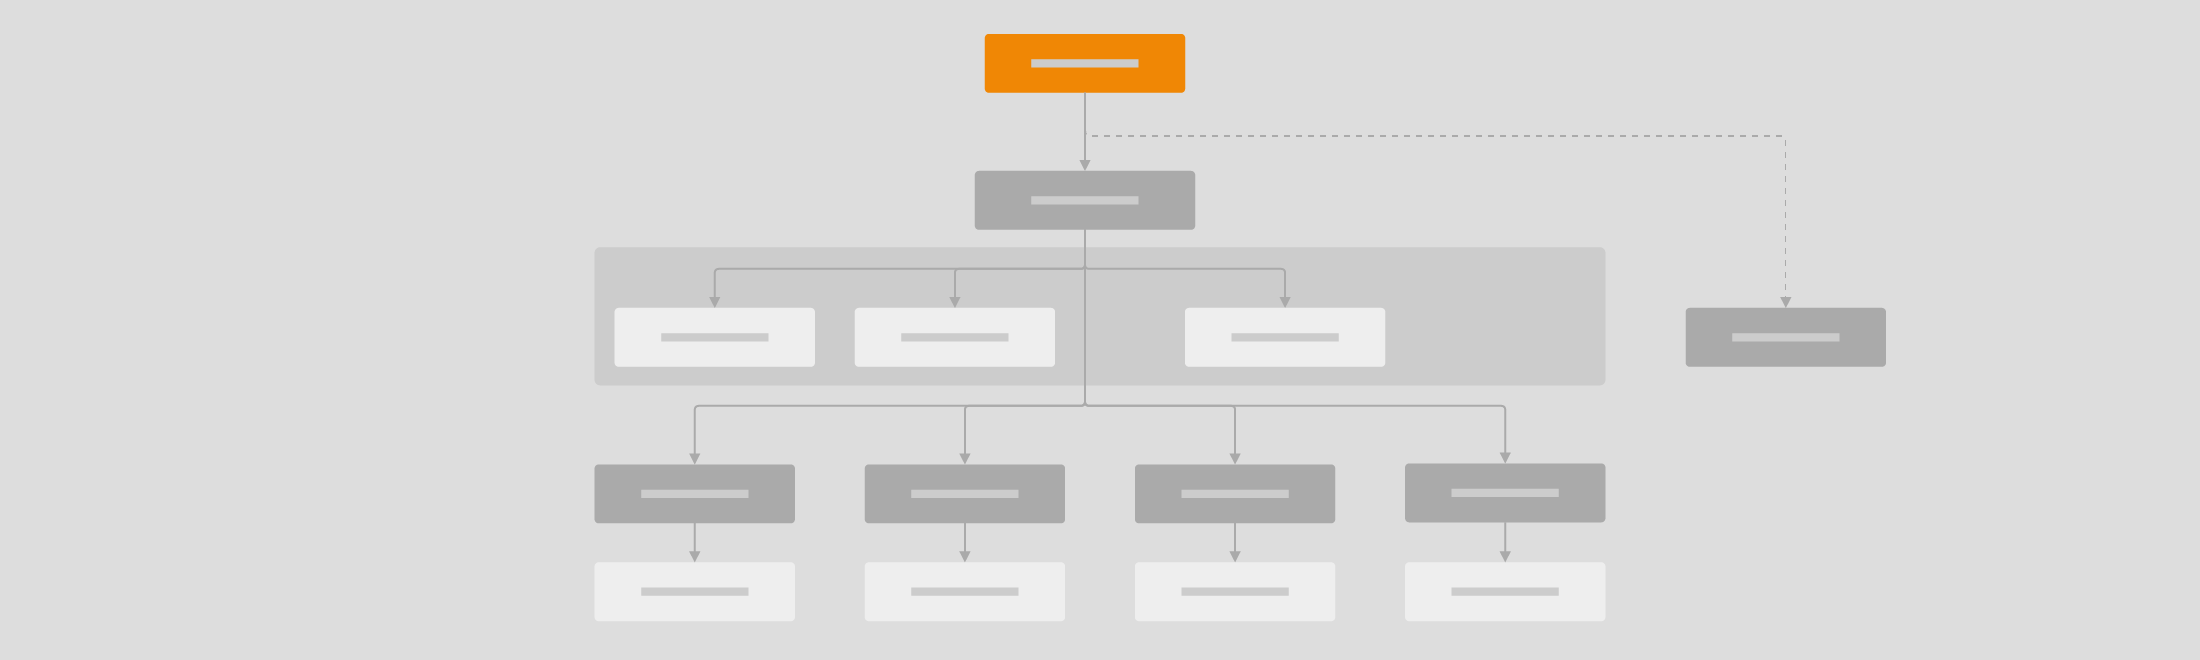 Work with tree diagrams like organization charts and mind maps in draw.io